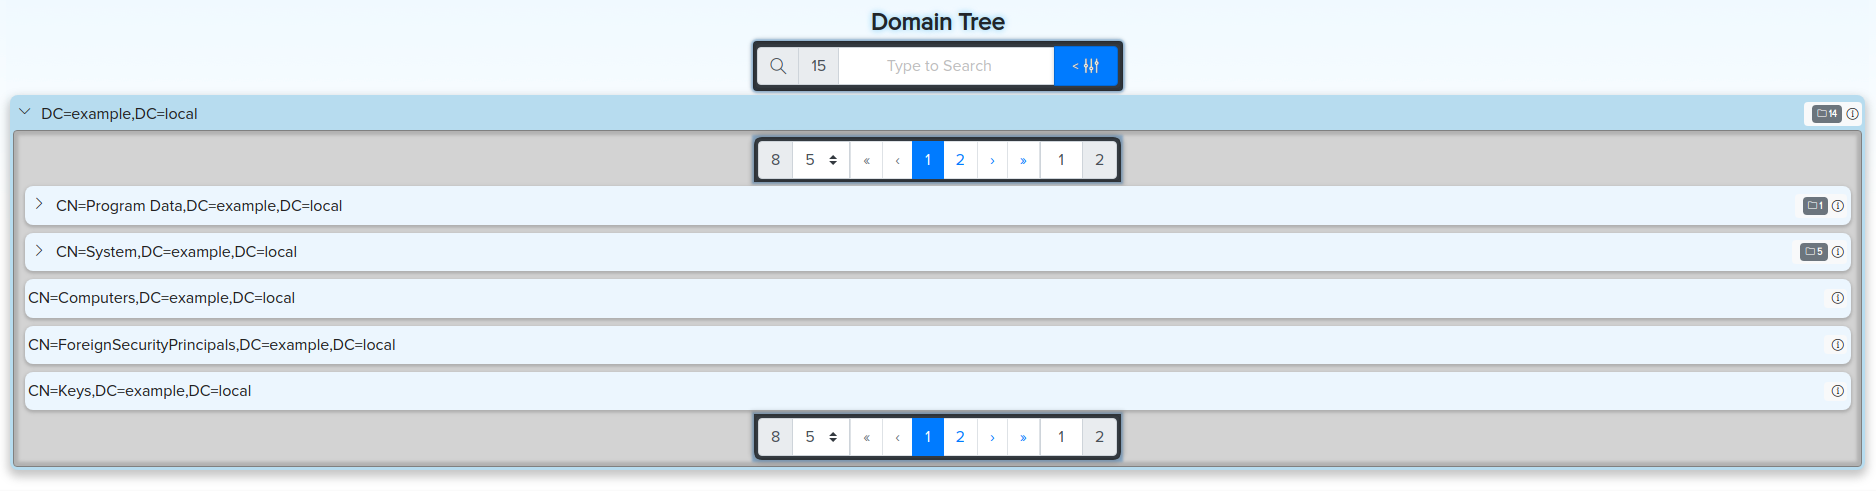 show_domain_tree.png